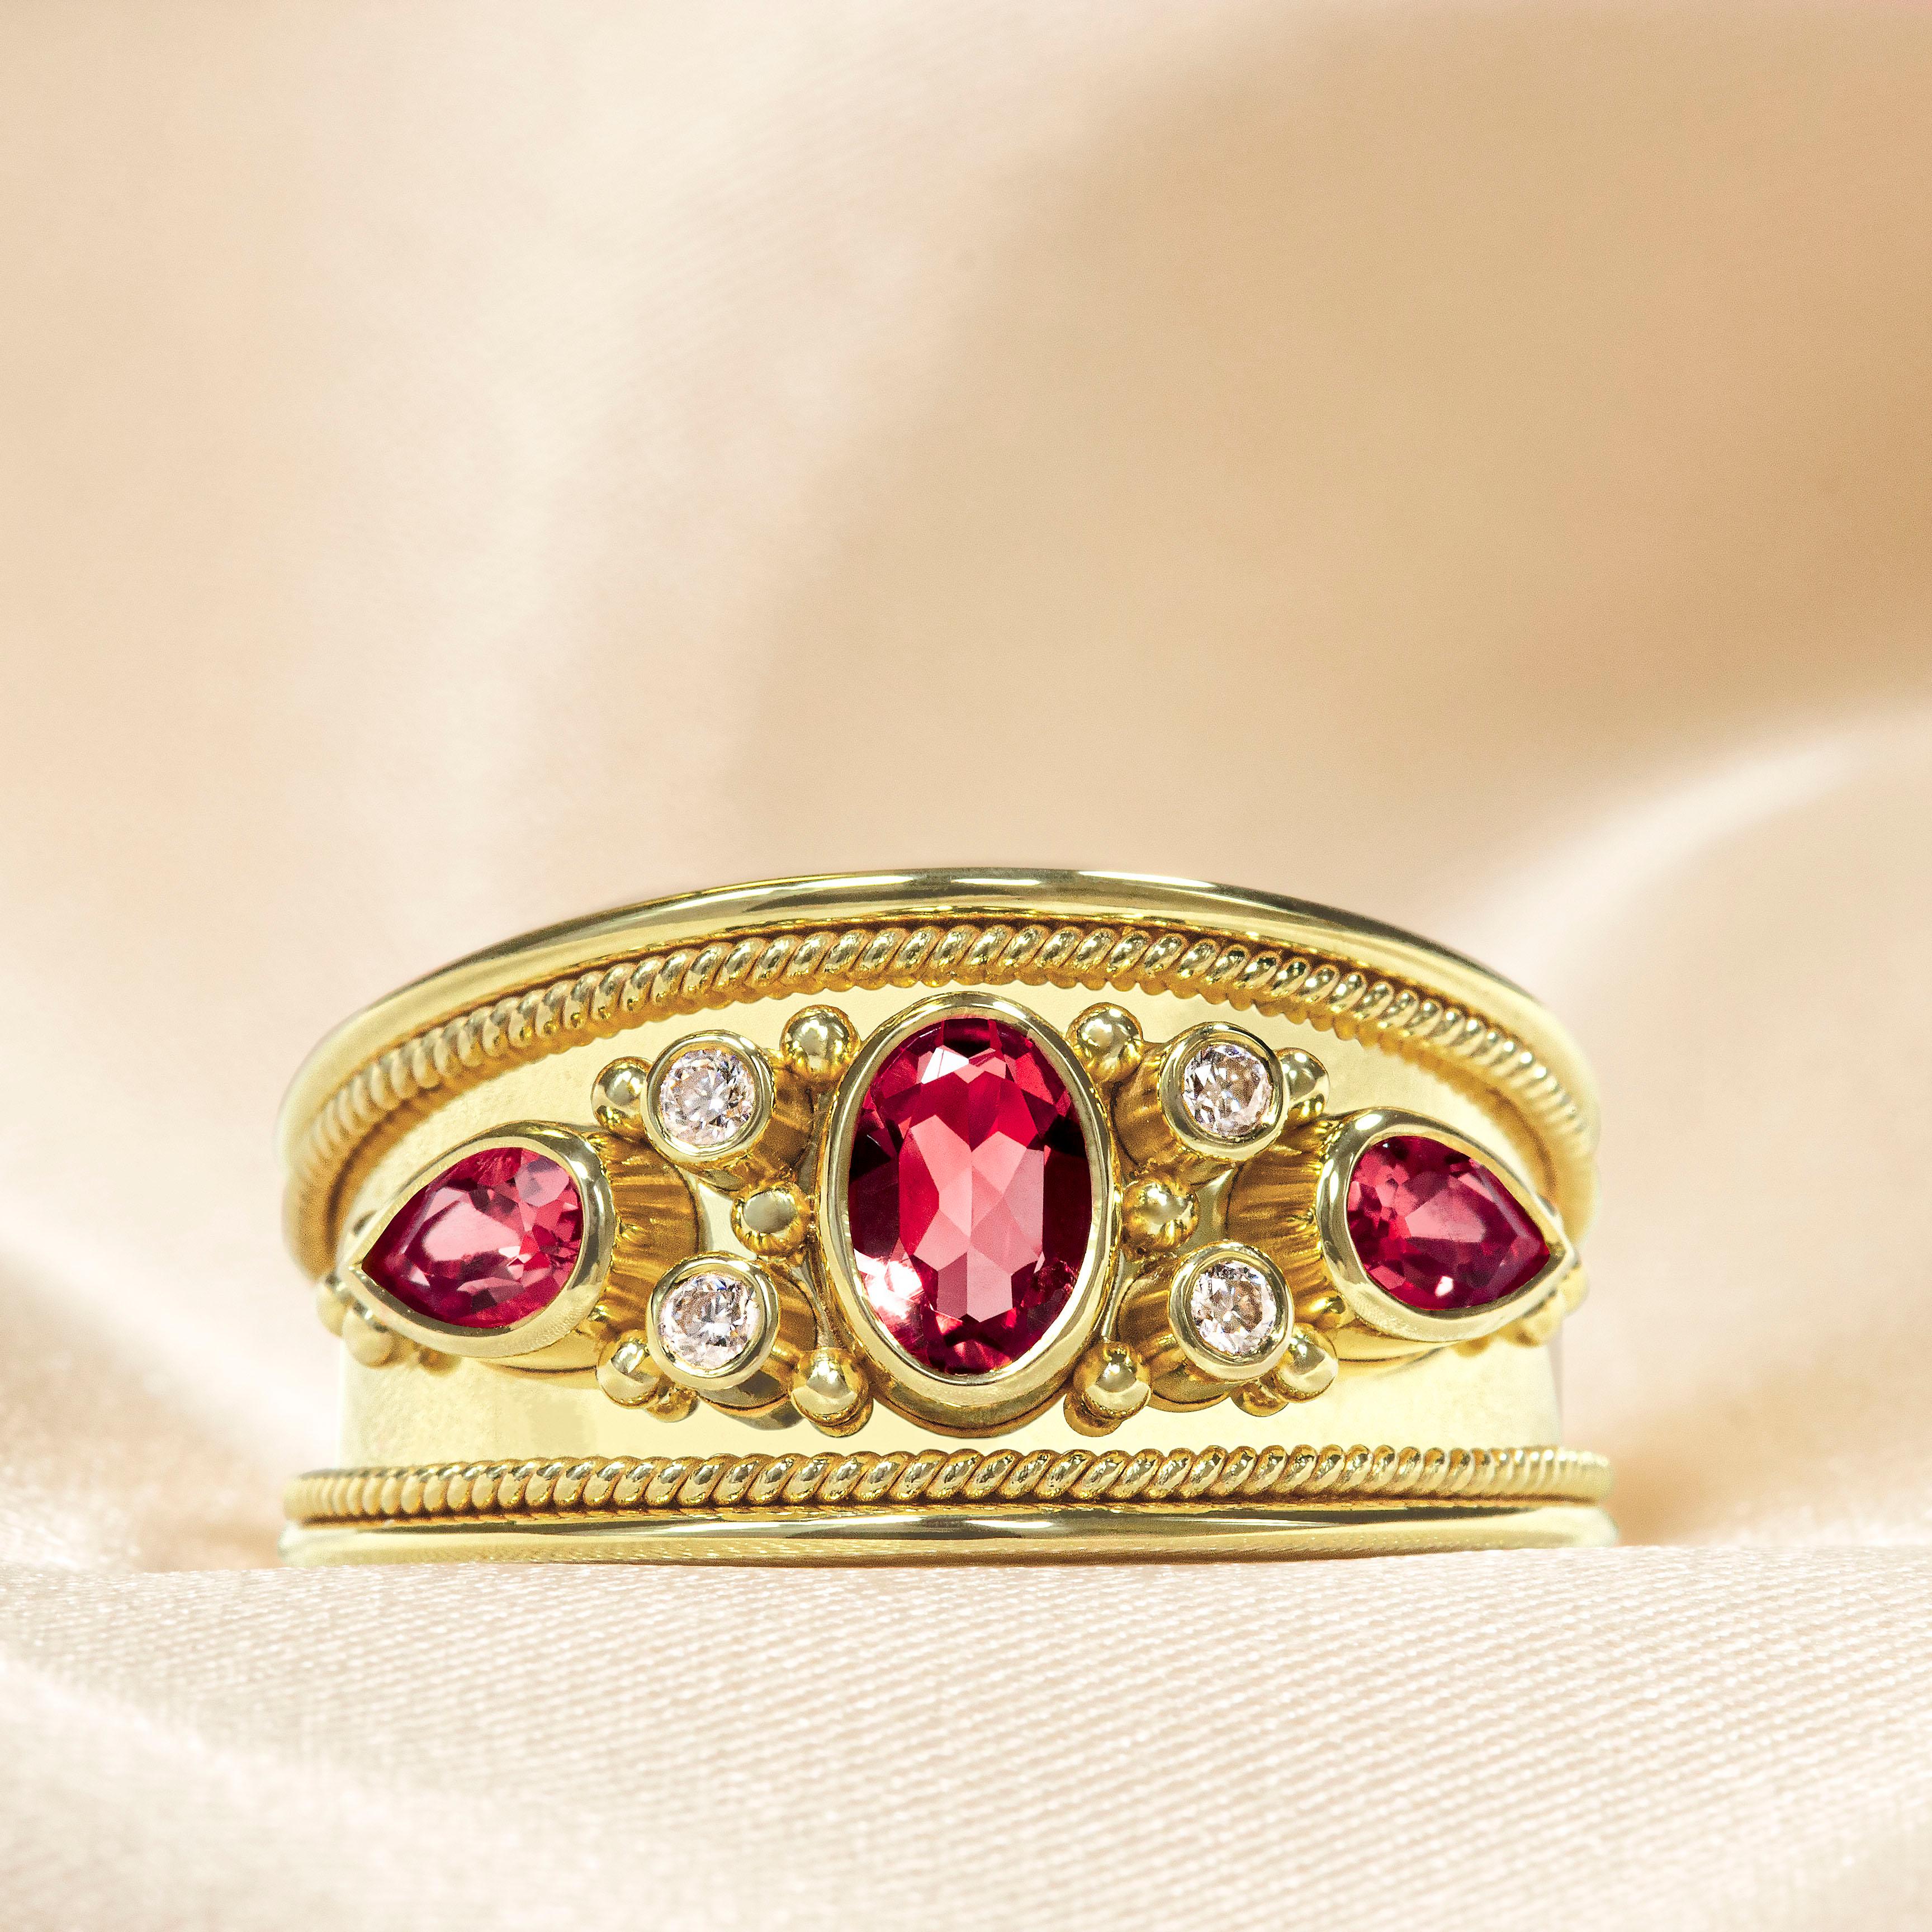 Elegance takes center stage with our captivating gold ring, where fiery rubies, brilliants, and shiny finish converge in harmonious brilliance. This exquisite piece is more than jewelry; it's a statement of timeless glamour and sophistication that